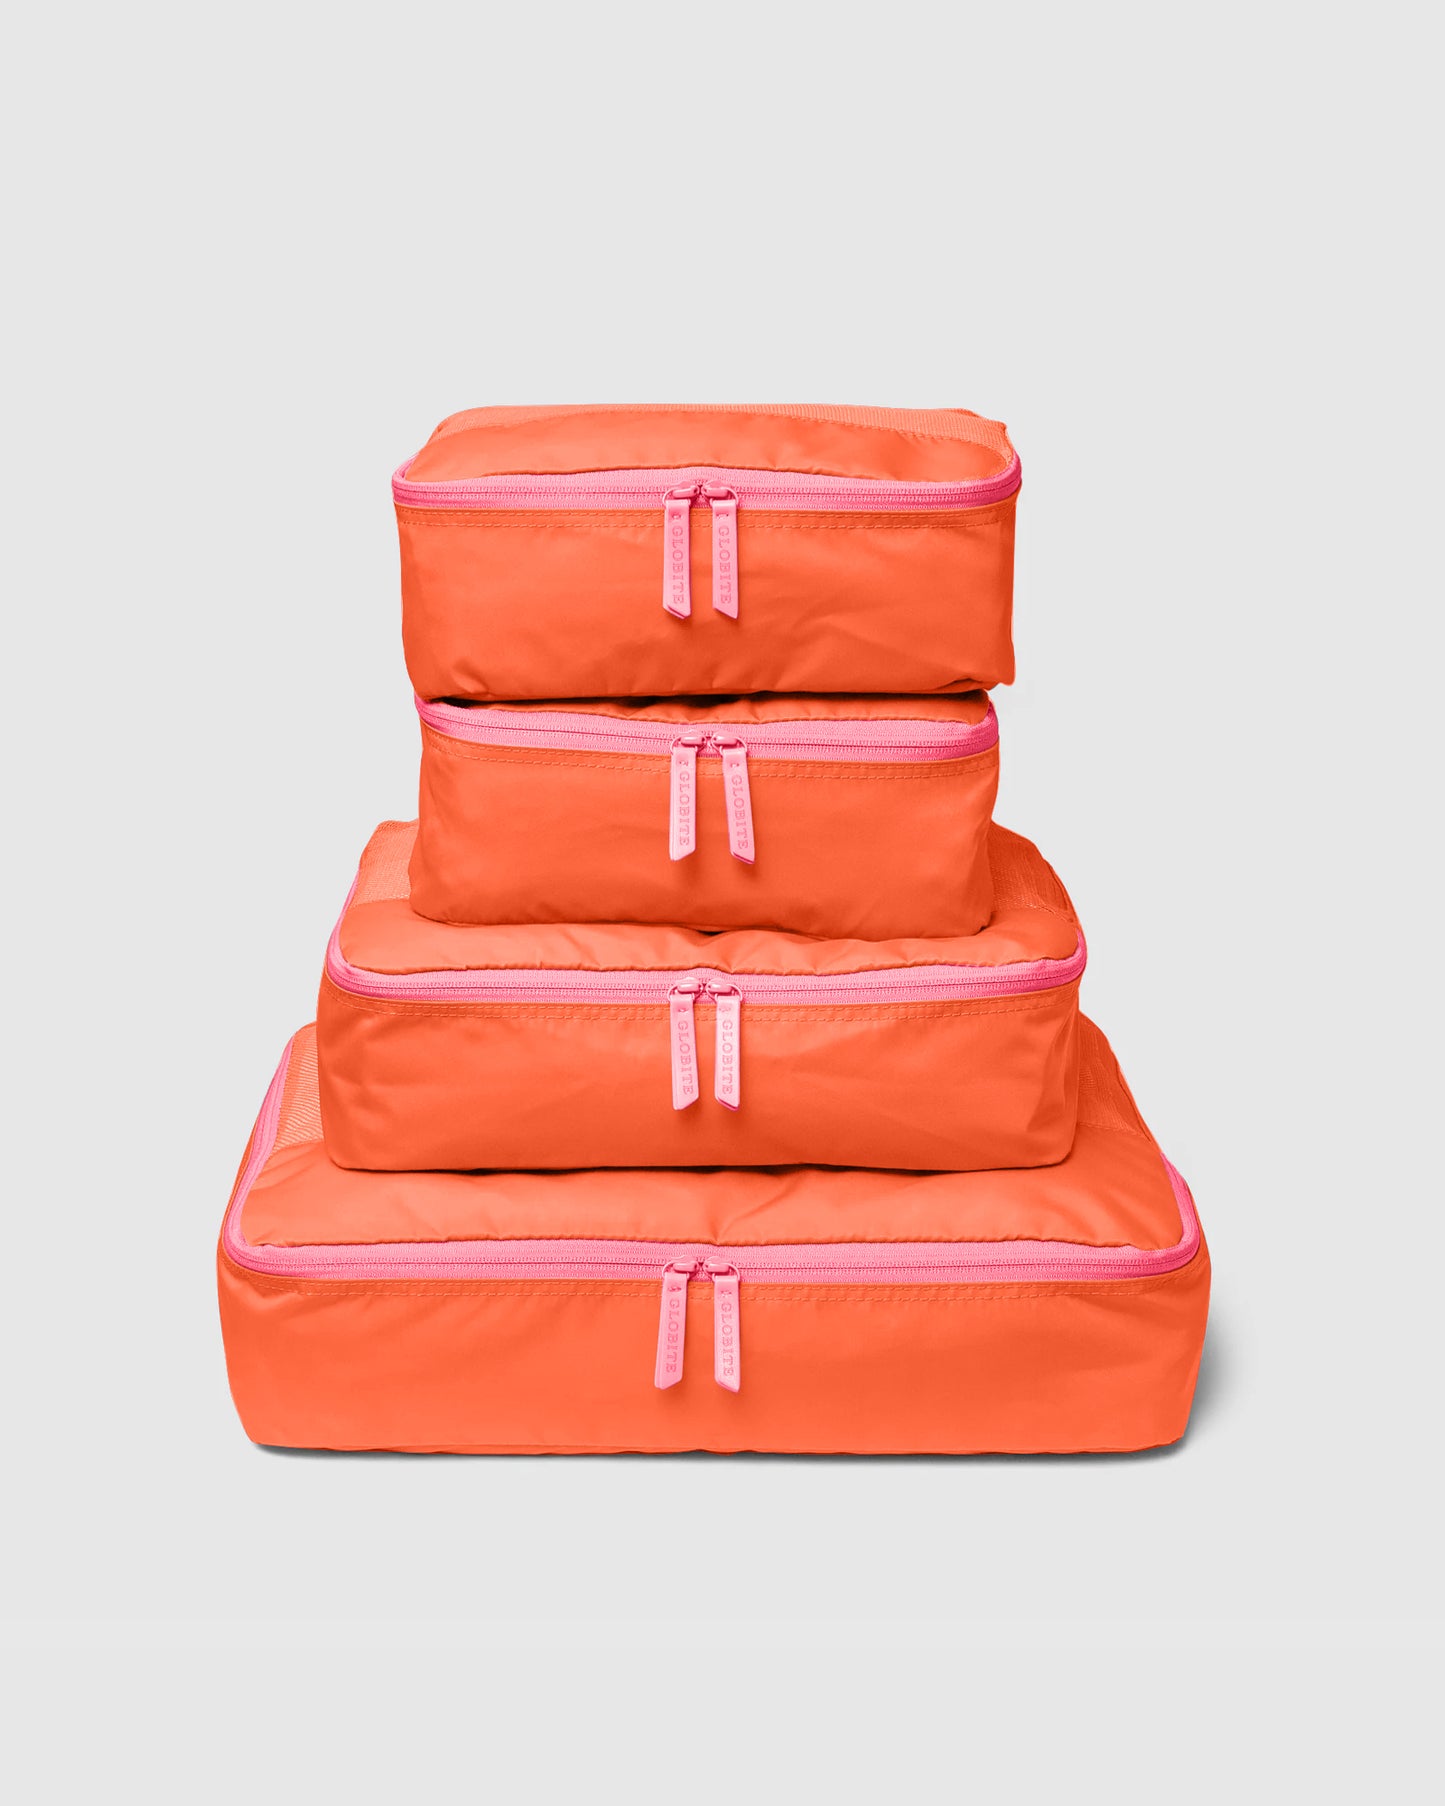 Exotic Orange Neon Limited Edition 4 Piece Packing Cube